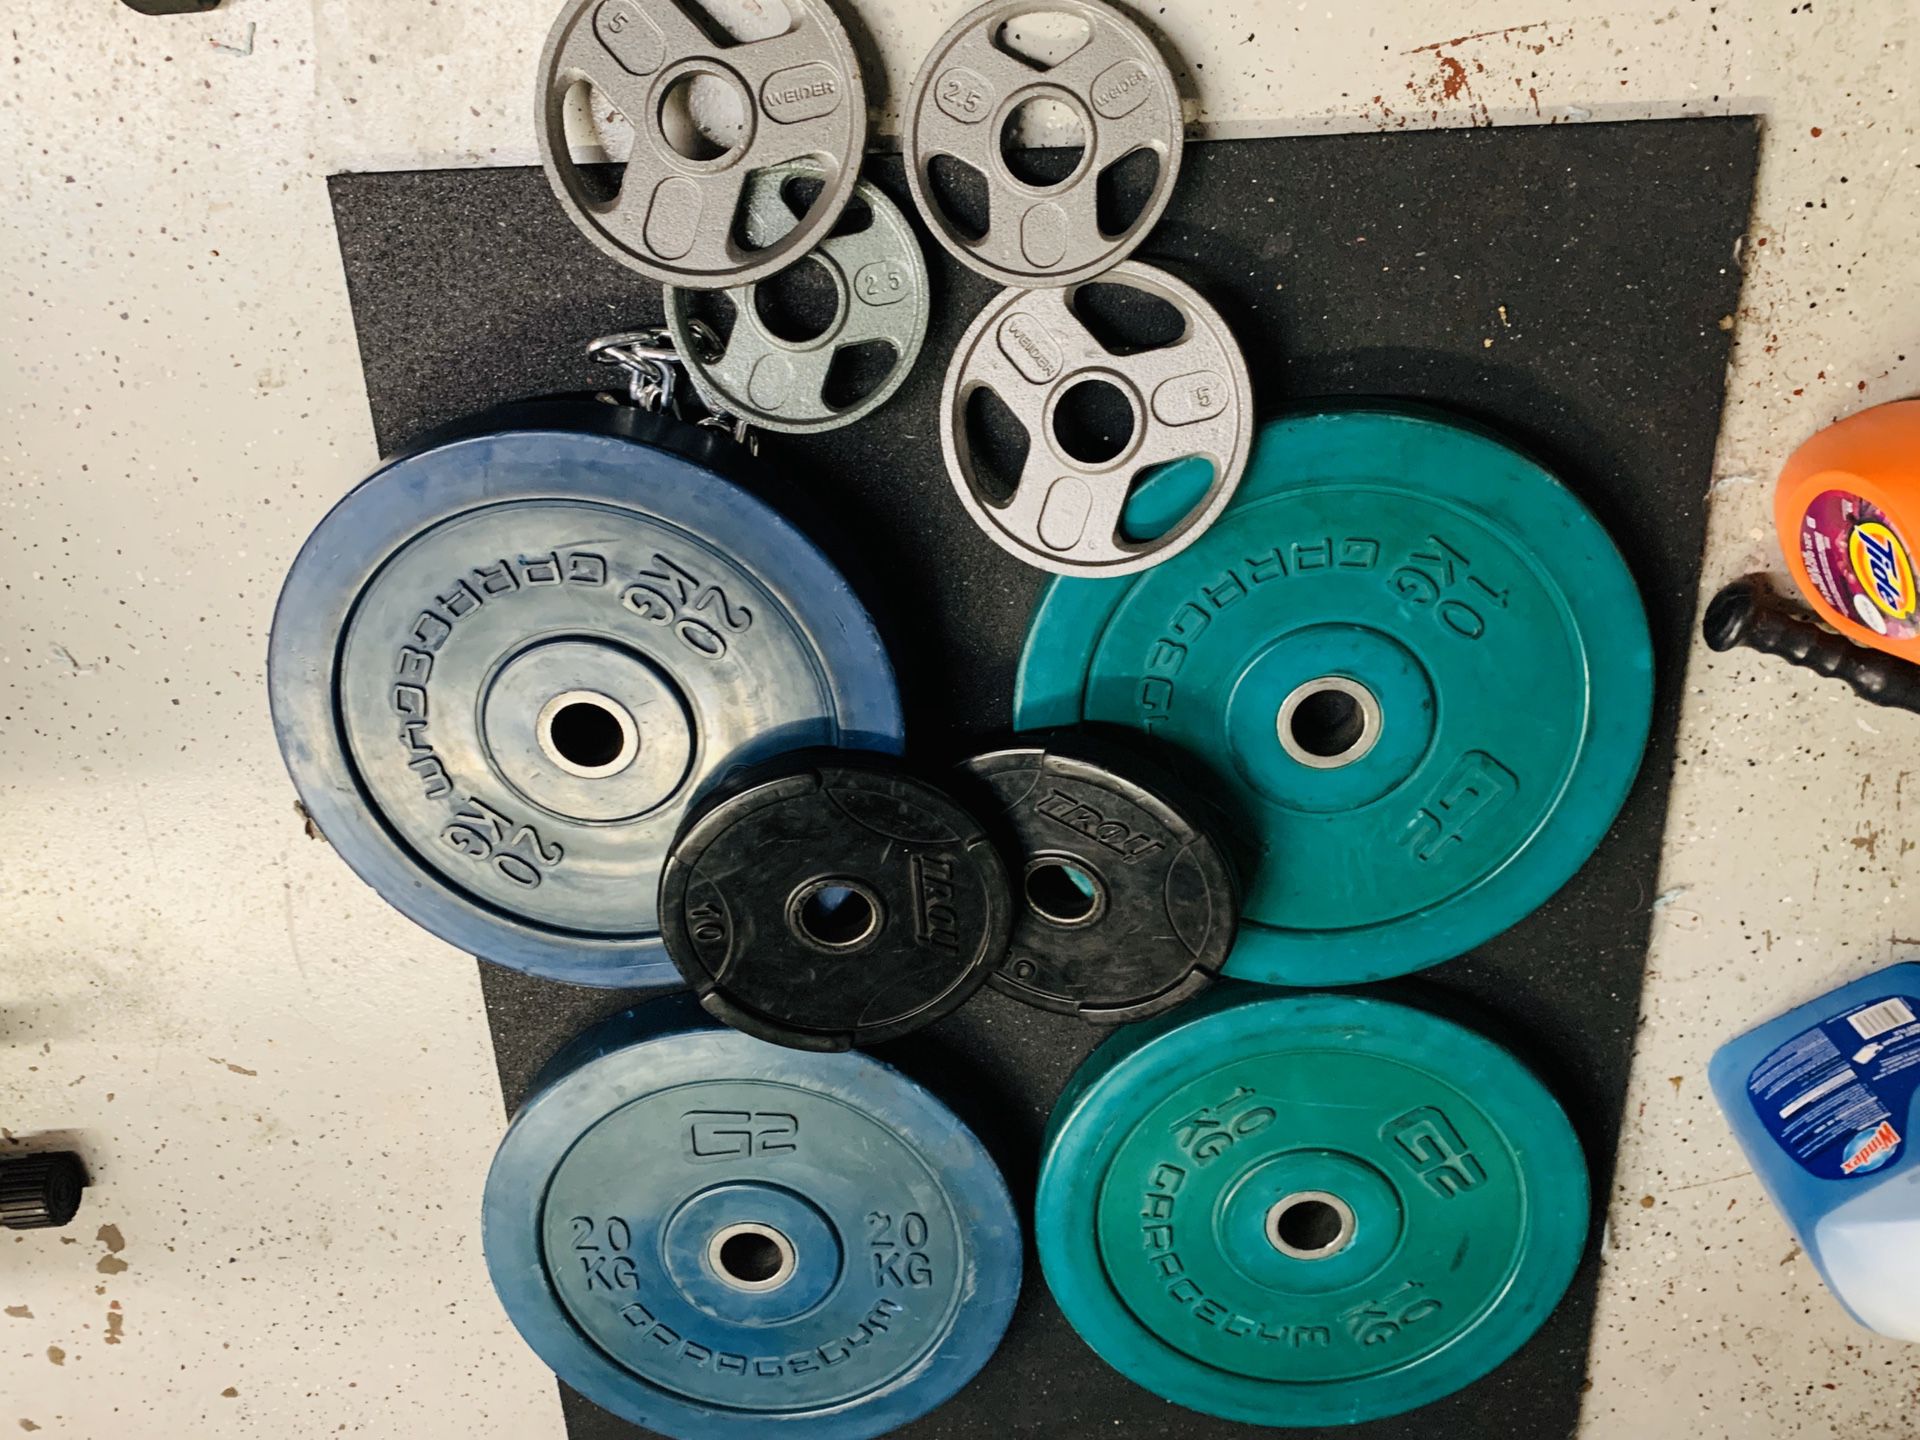 Bumper plates and change plates